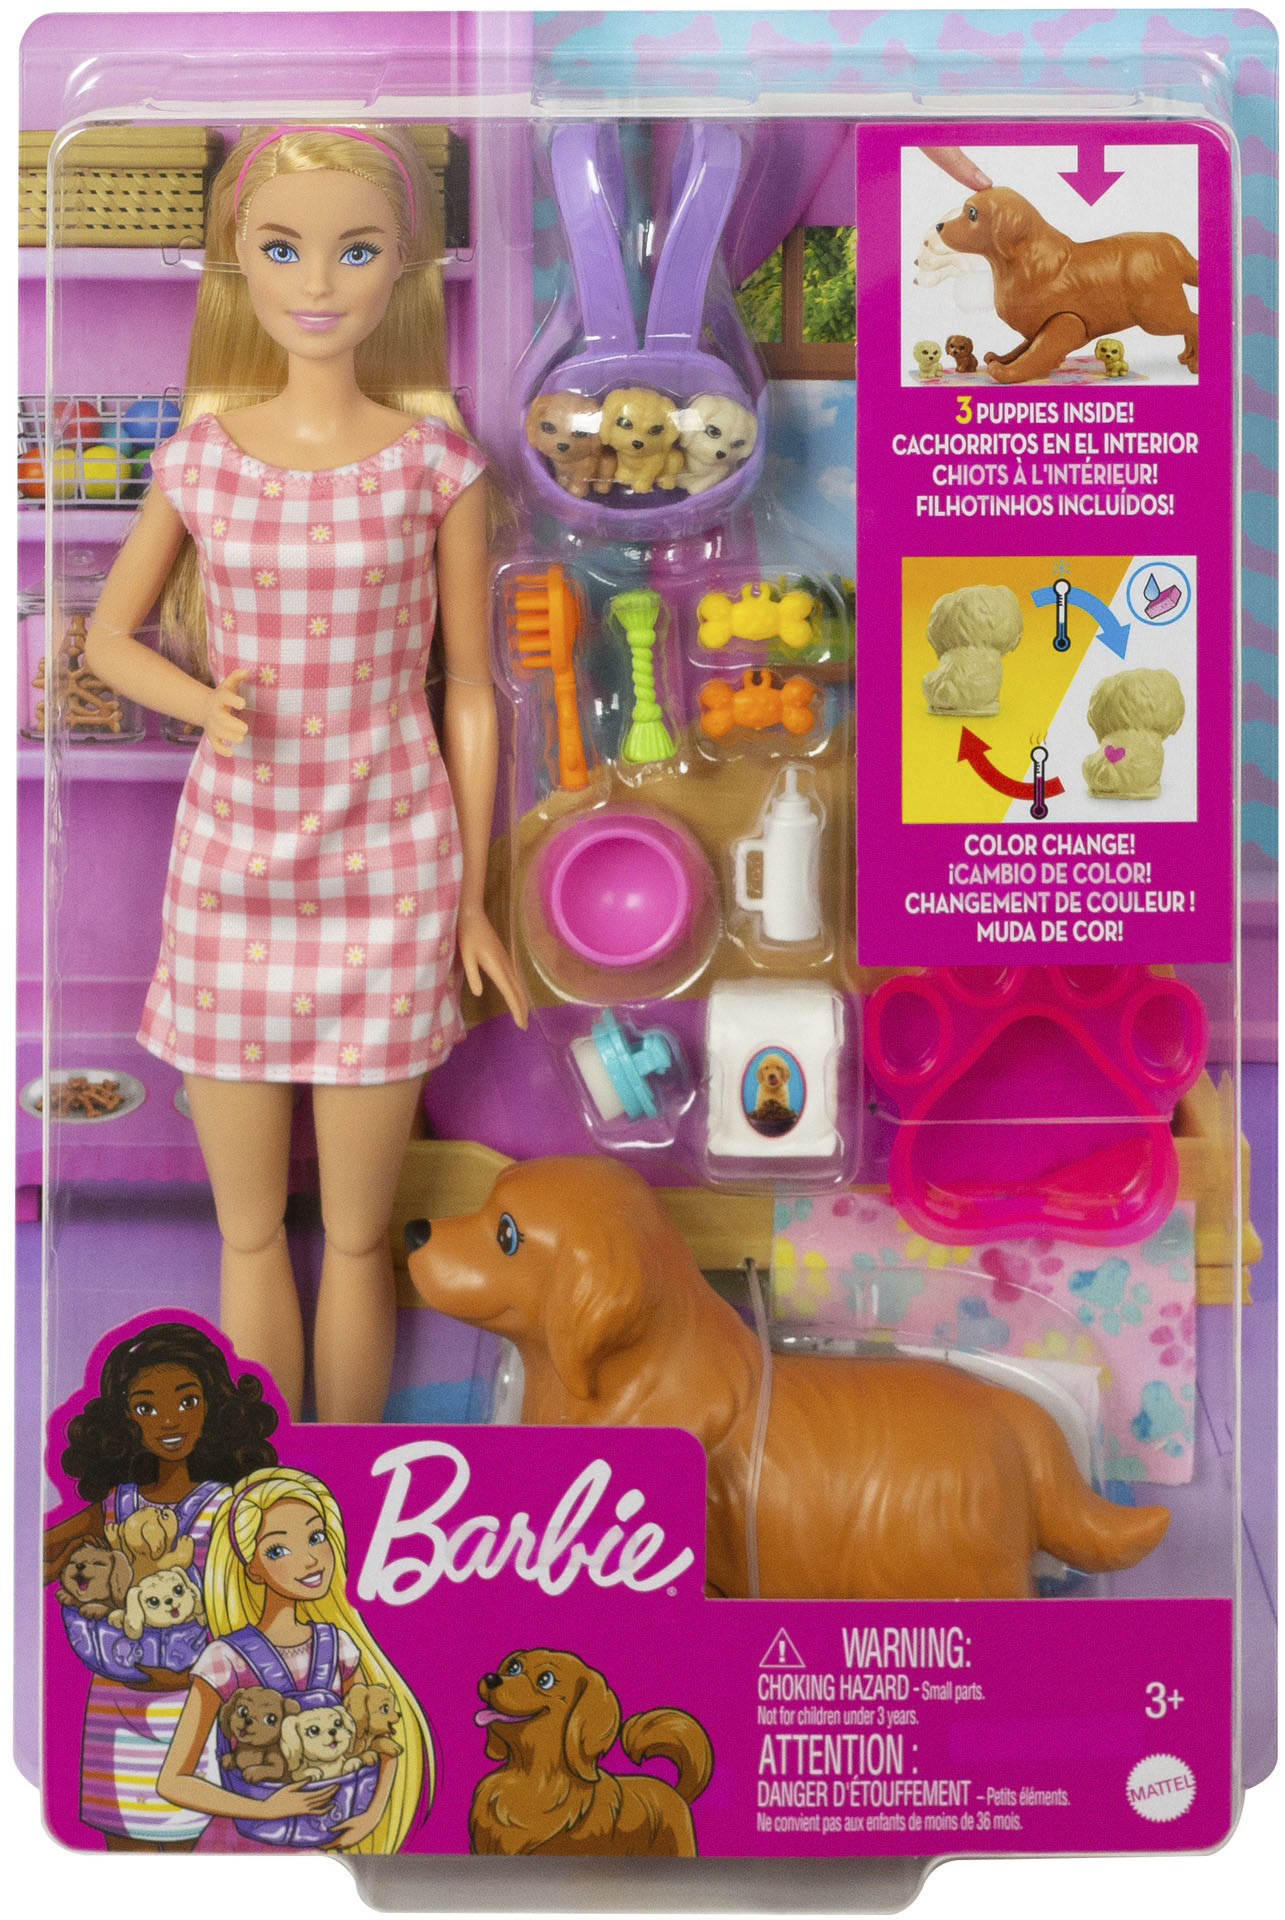 Barbie Newborn Pups Playset With & Animal Toys Doll Multicolor